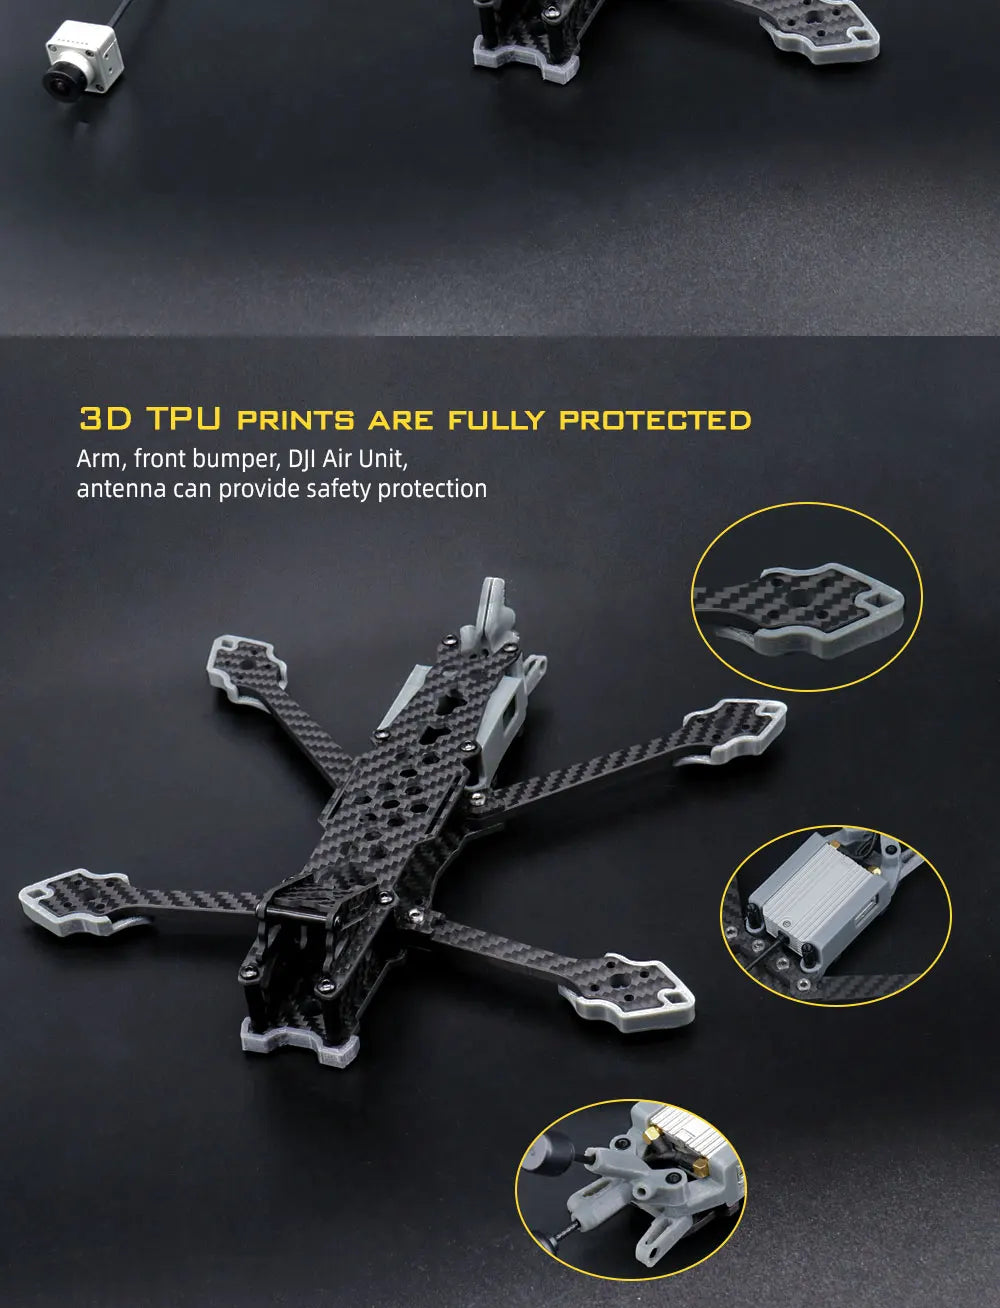 5-Inch FPV frame Kit, 3D TPU PRINTS ARE FULLY PROTECTED Arm, front bumper;